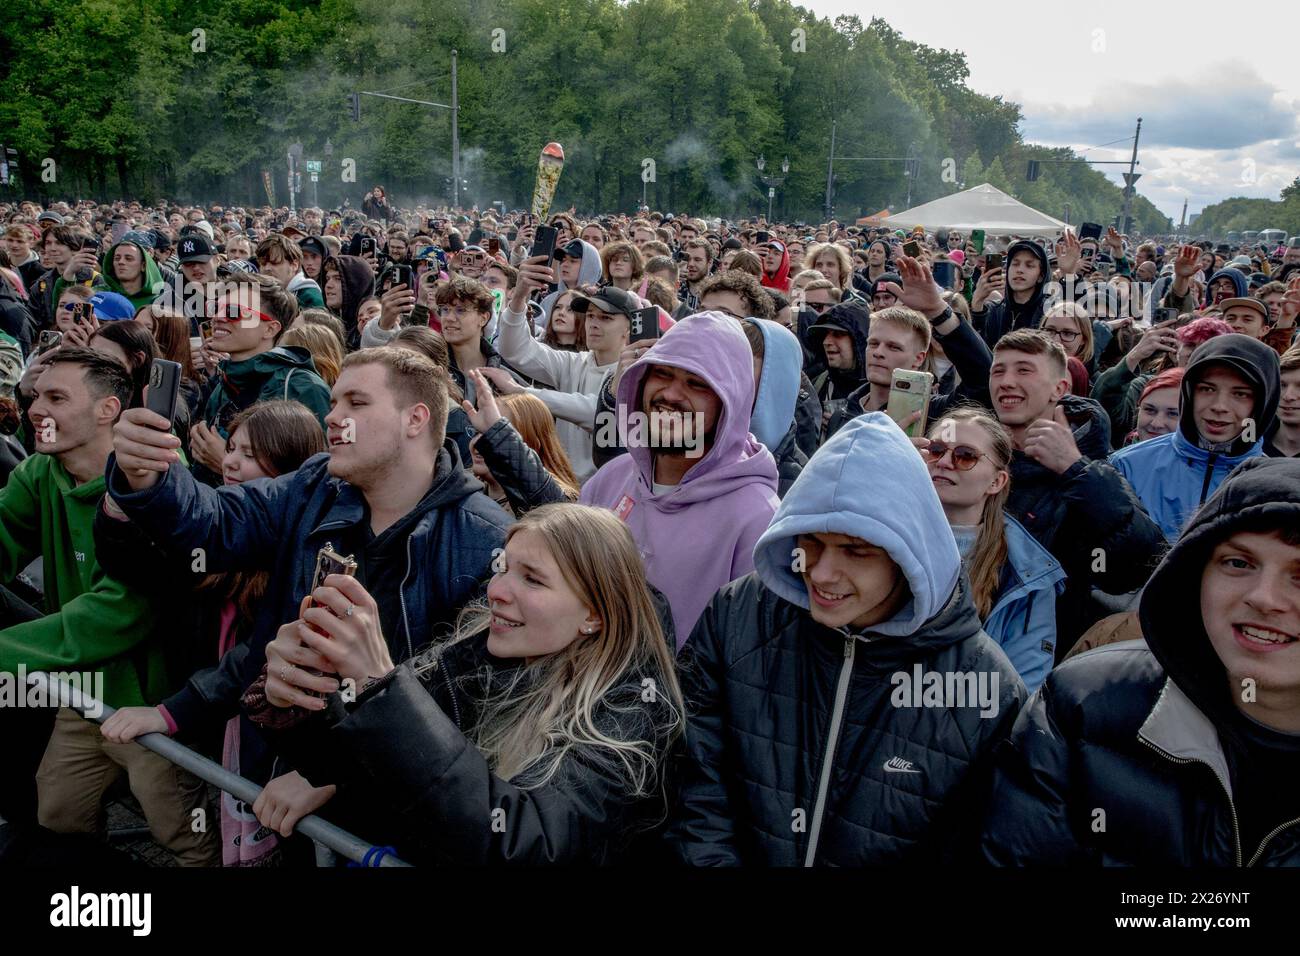 People gathered at the Brandenburg Gate in Berlin on Saturday, April 20, 2024, to celebrate the first legal 'Smoke-In' event, marking 420 Day, a date internationally recognized as a celebration of cannabis culture. Performances by notable acts such as Marsimoto, Green, Marvin Game, Ganjaman, and parts of Culcha Candela entertained the crowd, including prominent figures like Judge Andreas Müller of Bernau District Court. Müller, a well-known advocate for cannabis legalization, has been a visible proponent in the push for reform. Event organizers emphasized its significance as a demonstration of Stock Photo